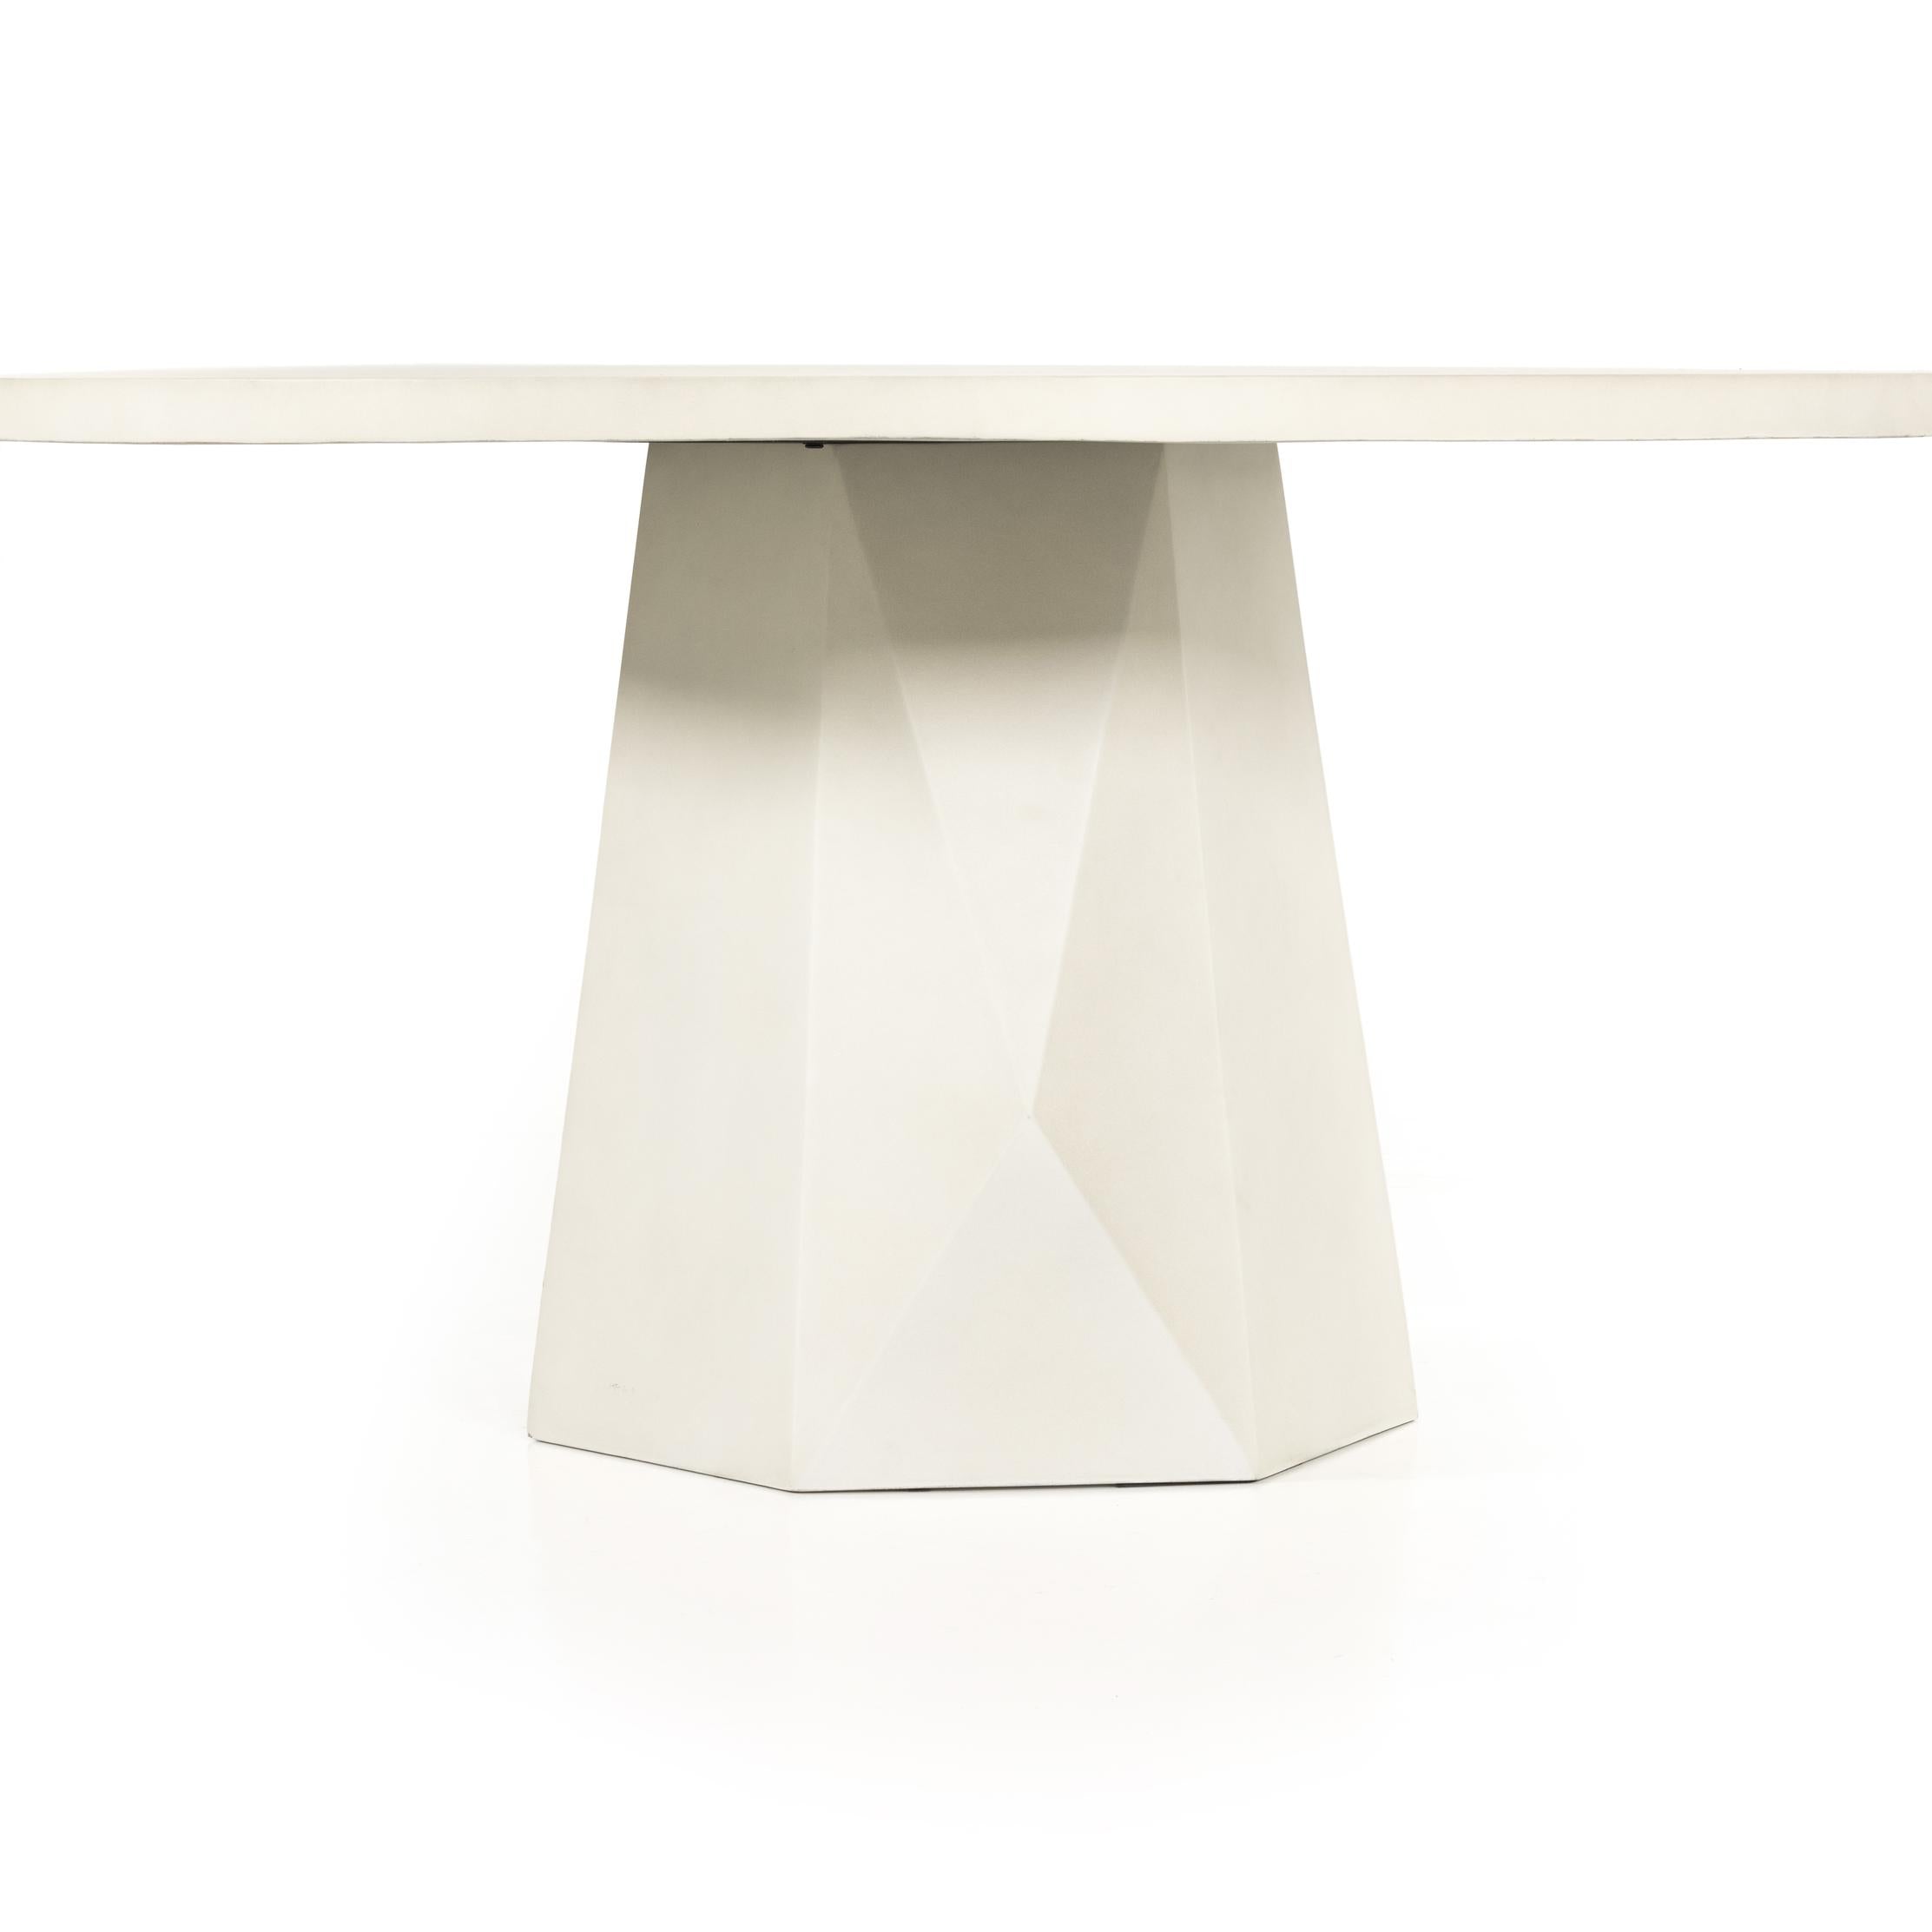 Bowman Outdoor Dining Table - StyleMeGHD - Modern Home Decor